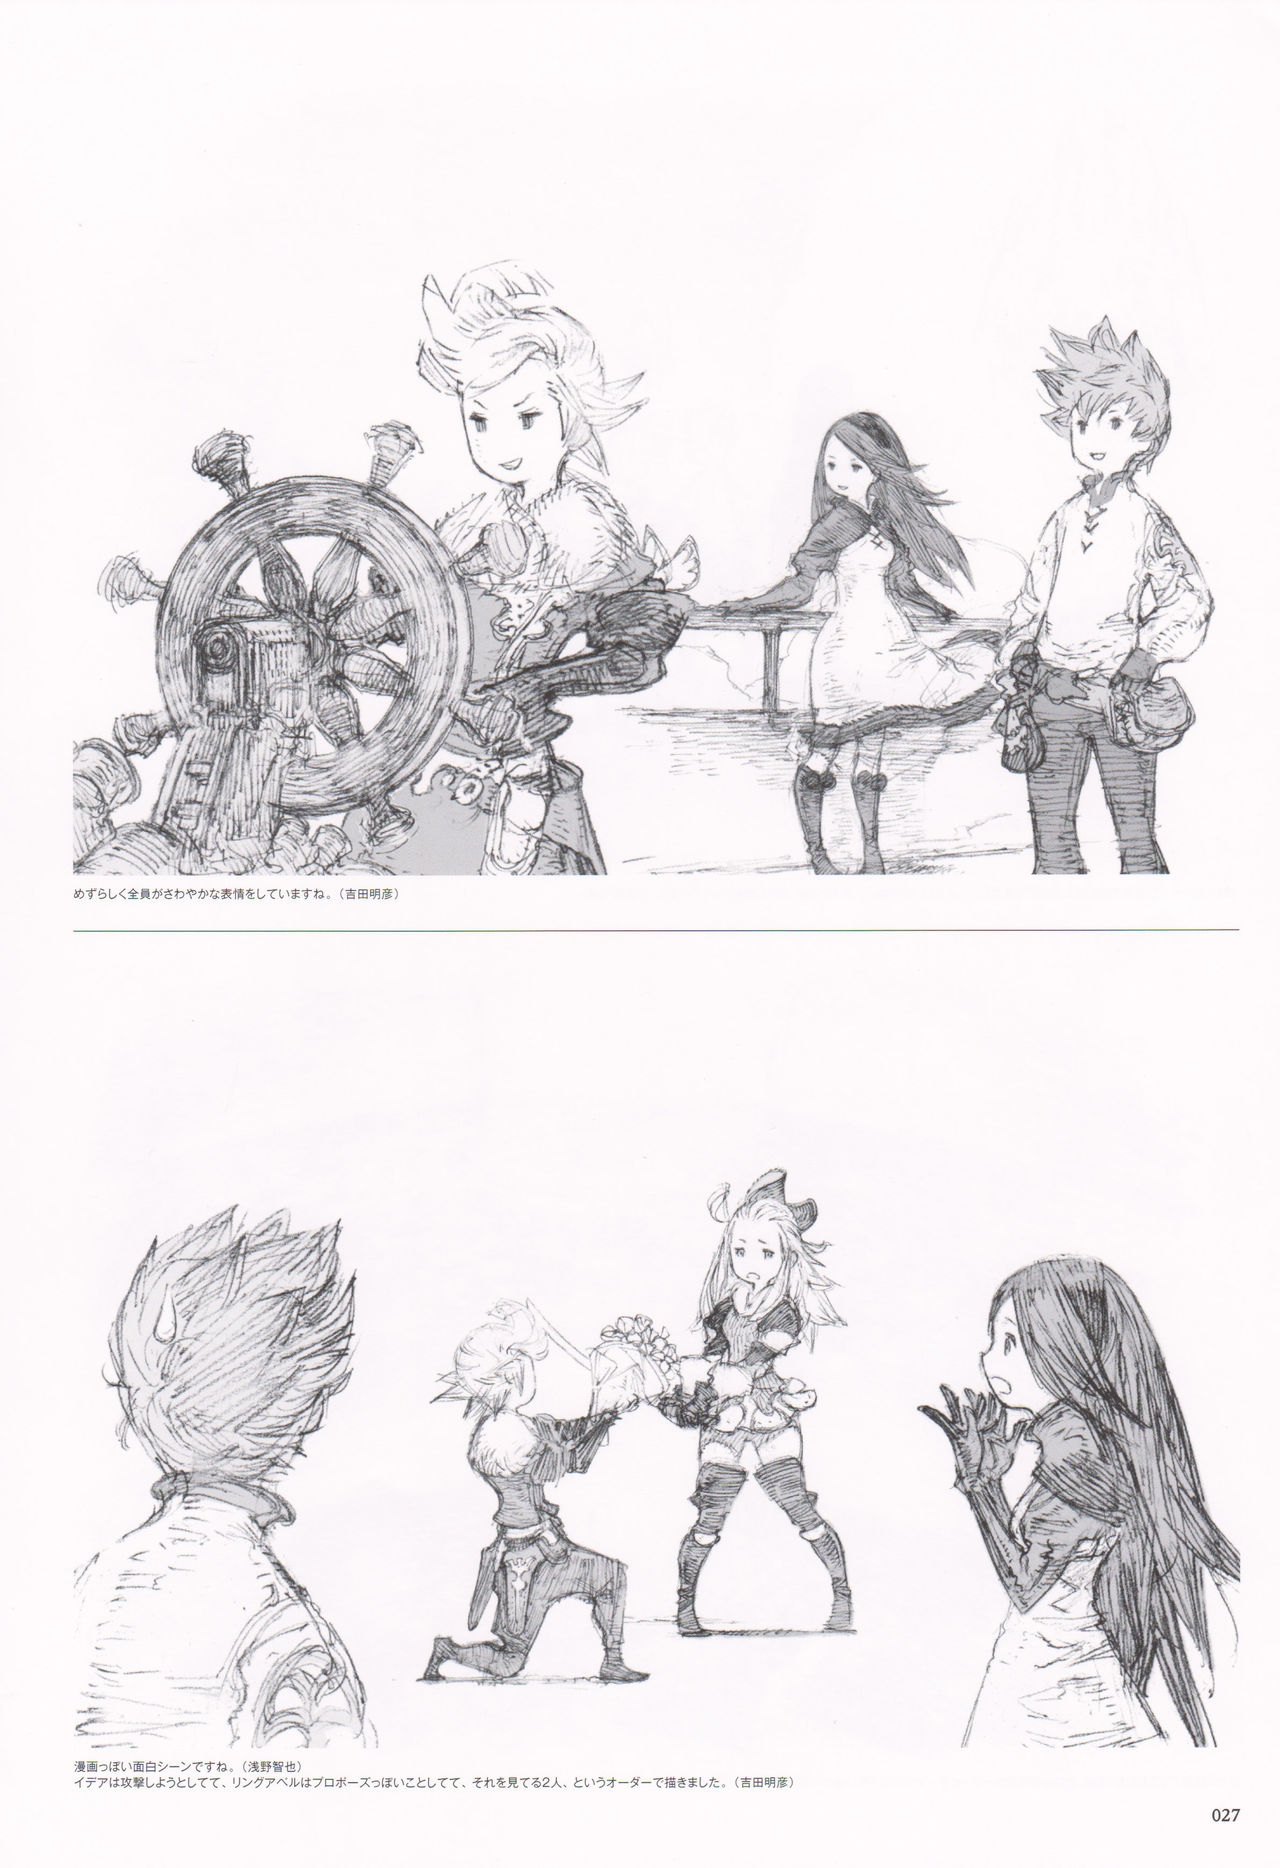 Bravely Second - End Layer - Design Works THE ART OF BRAVELY 2013-2015 27